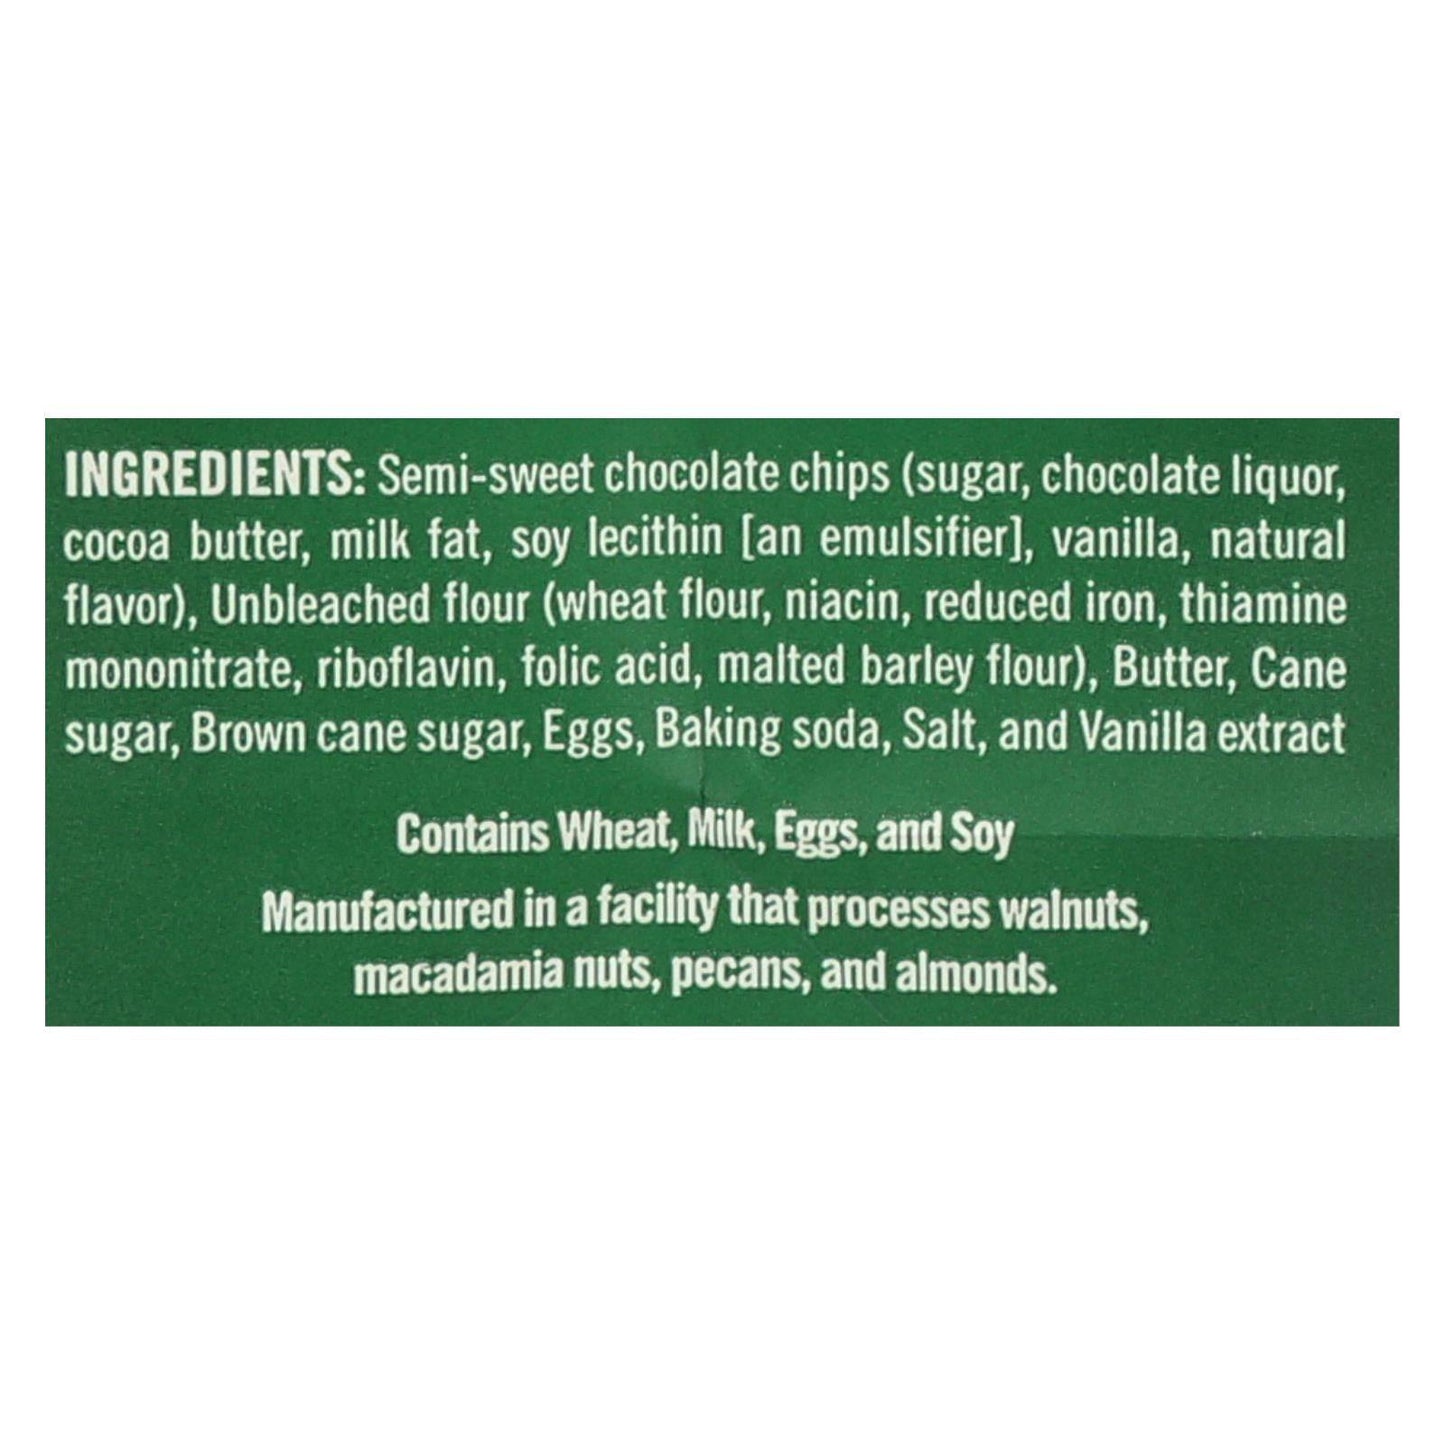 Buy Tate's Bake Shop Double Chocolate Chip Cookies - Case Of 12 - 7 Oz.  at OnlyNaturals.us